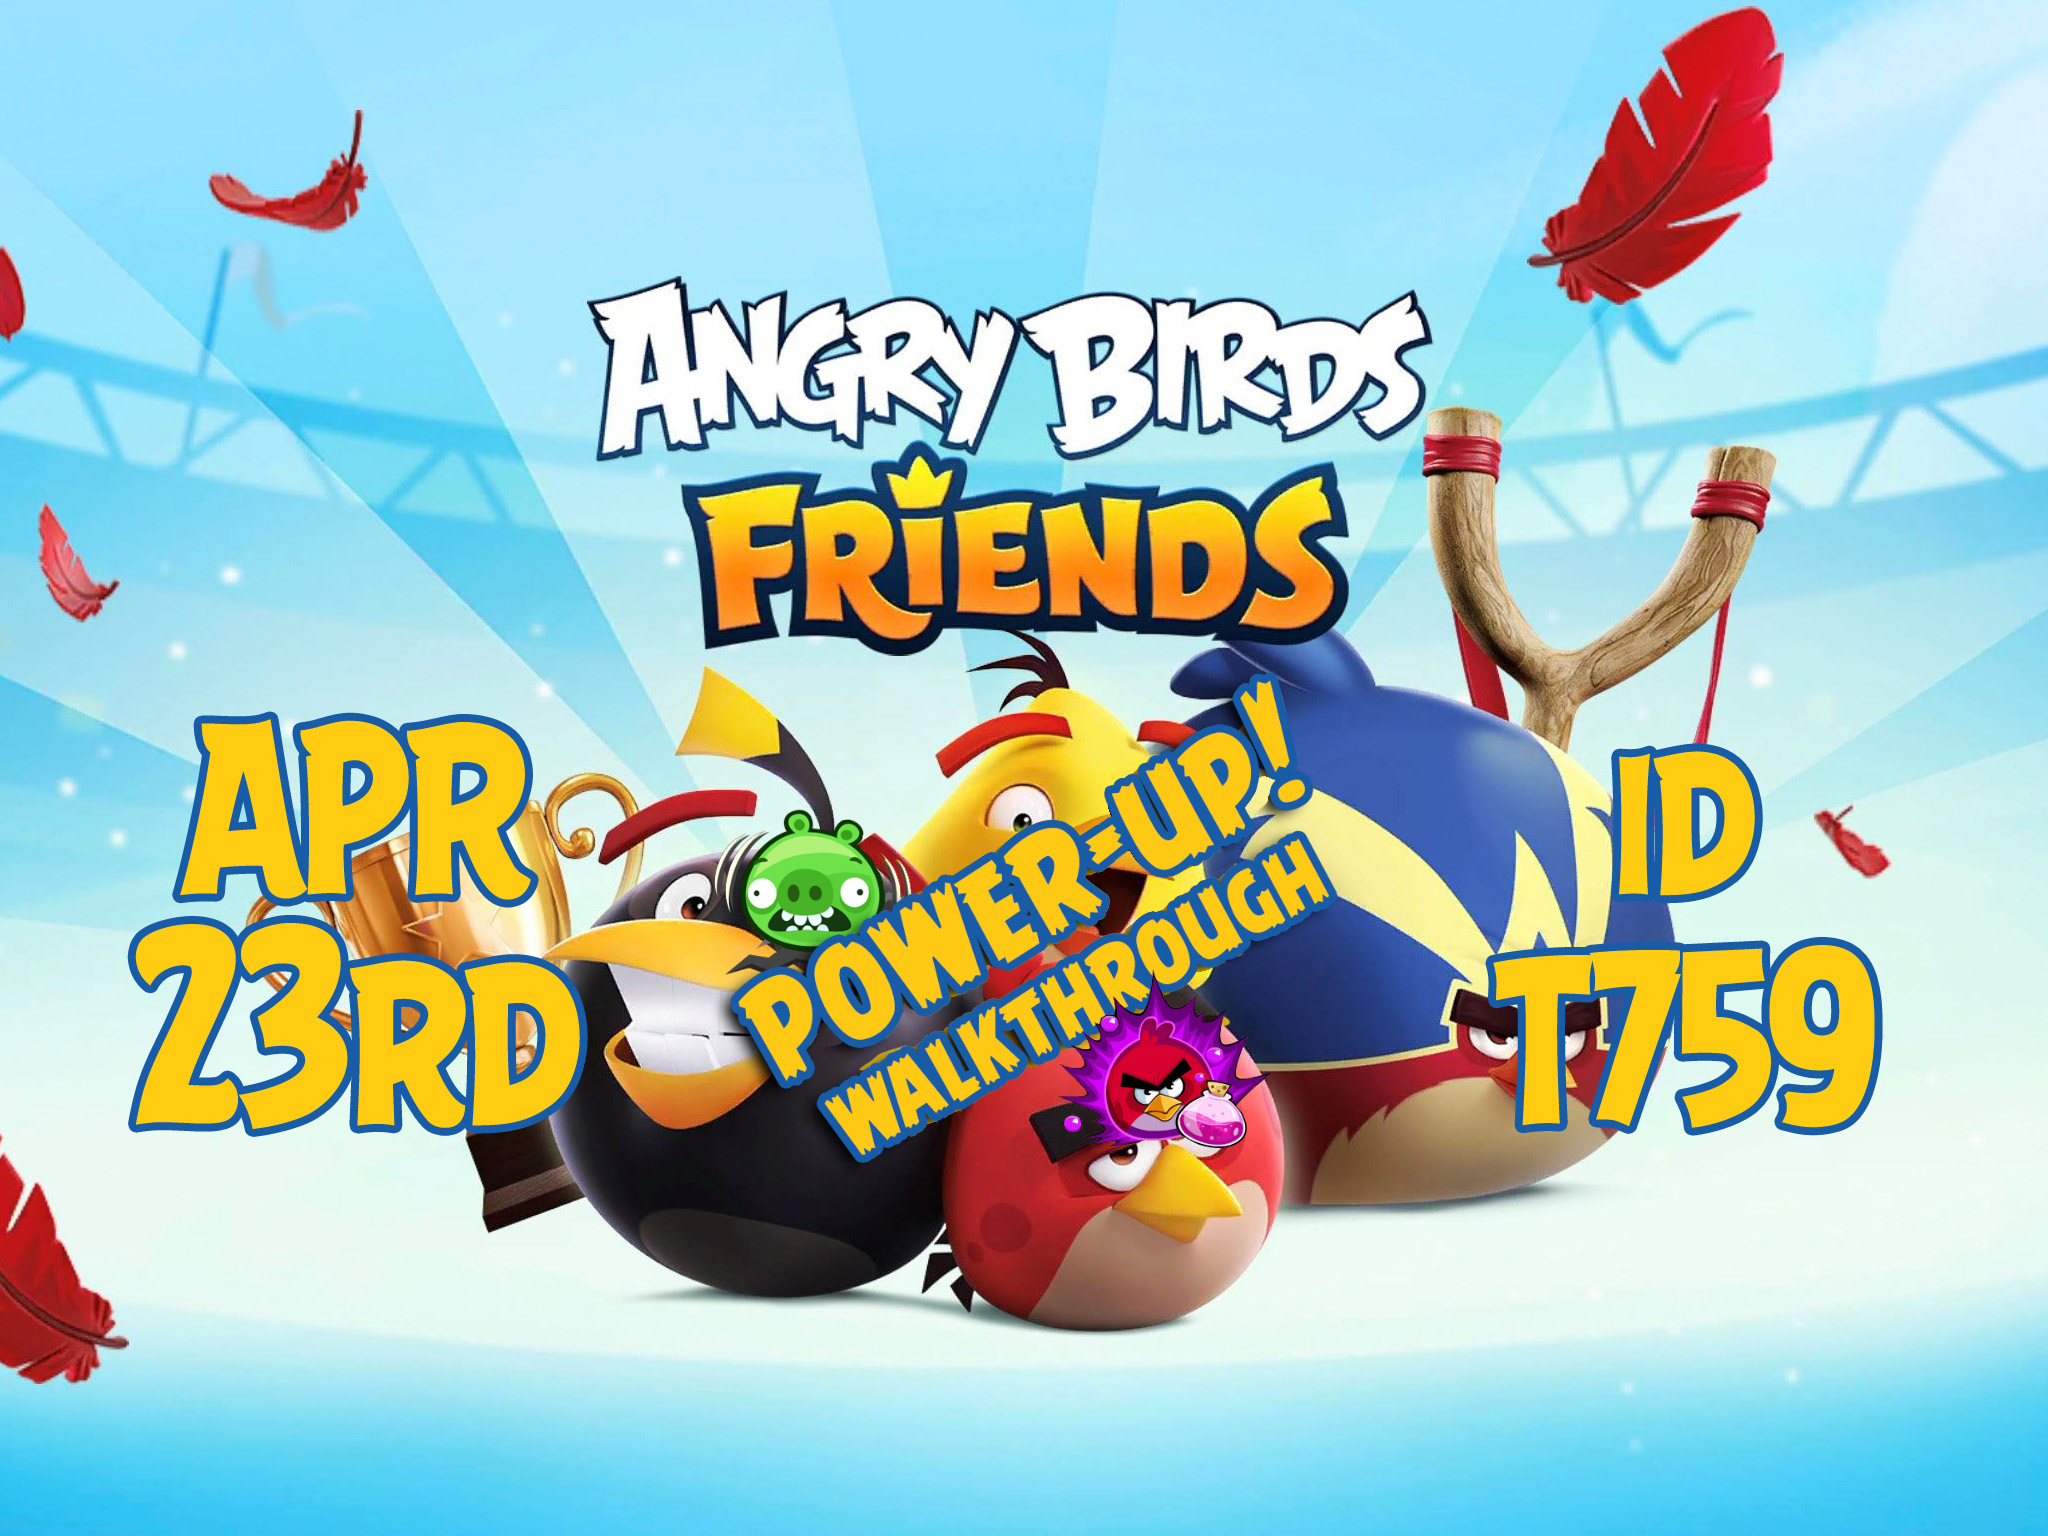 Angry-Birds-Friends-Tournament-T759-Feature-Image-PU